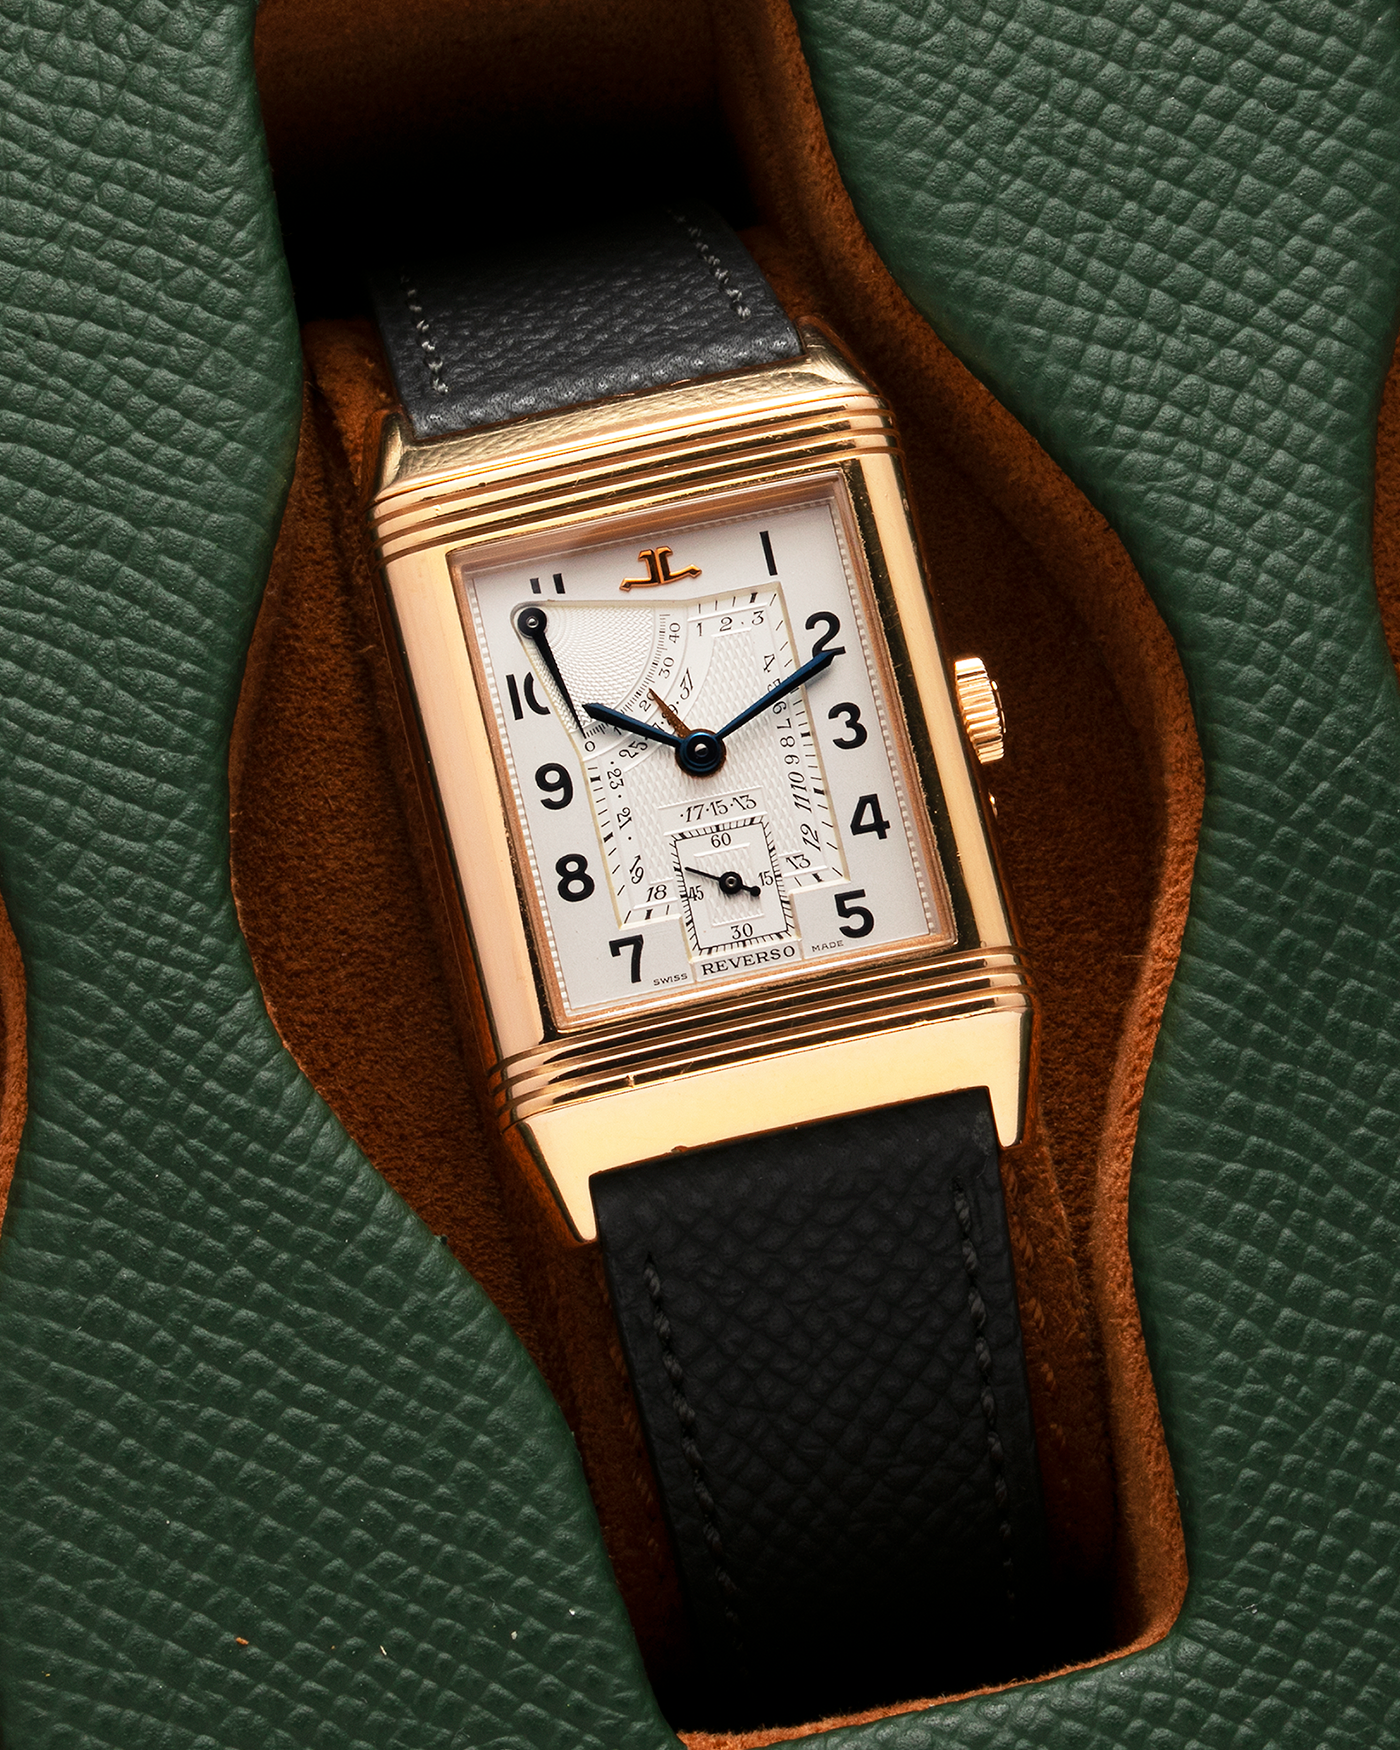 Brand: Jaeger LeCoultre Year: 1991 Model: Reverso Soixantième 60th Anniversary Ref. 270.2.64, Limited to 500 Pieces Reference: 270.2.64 Material: 18-carat Rose Gold Movement: JLC Cal. 824, Manual-Wind Case Diameter: 42mm x 26mm x 9.5mm Lug Width: 19mm Strap: Molequin Grey Textured Calf with Signed 18-carat Pink Gold Deployant Clasp